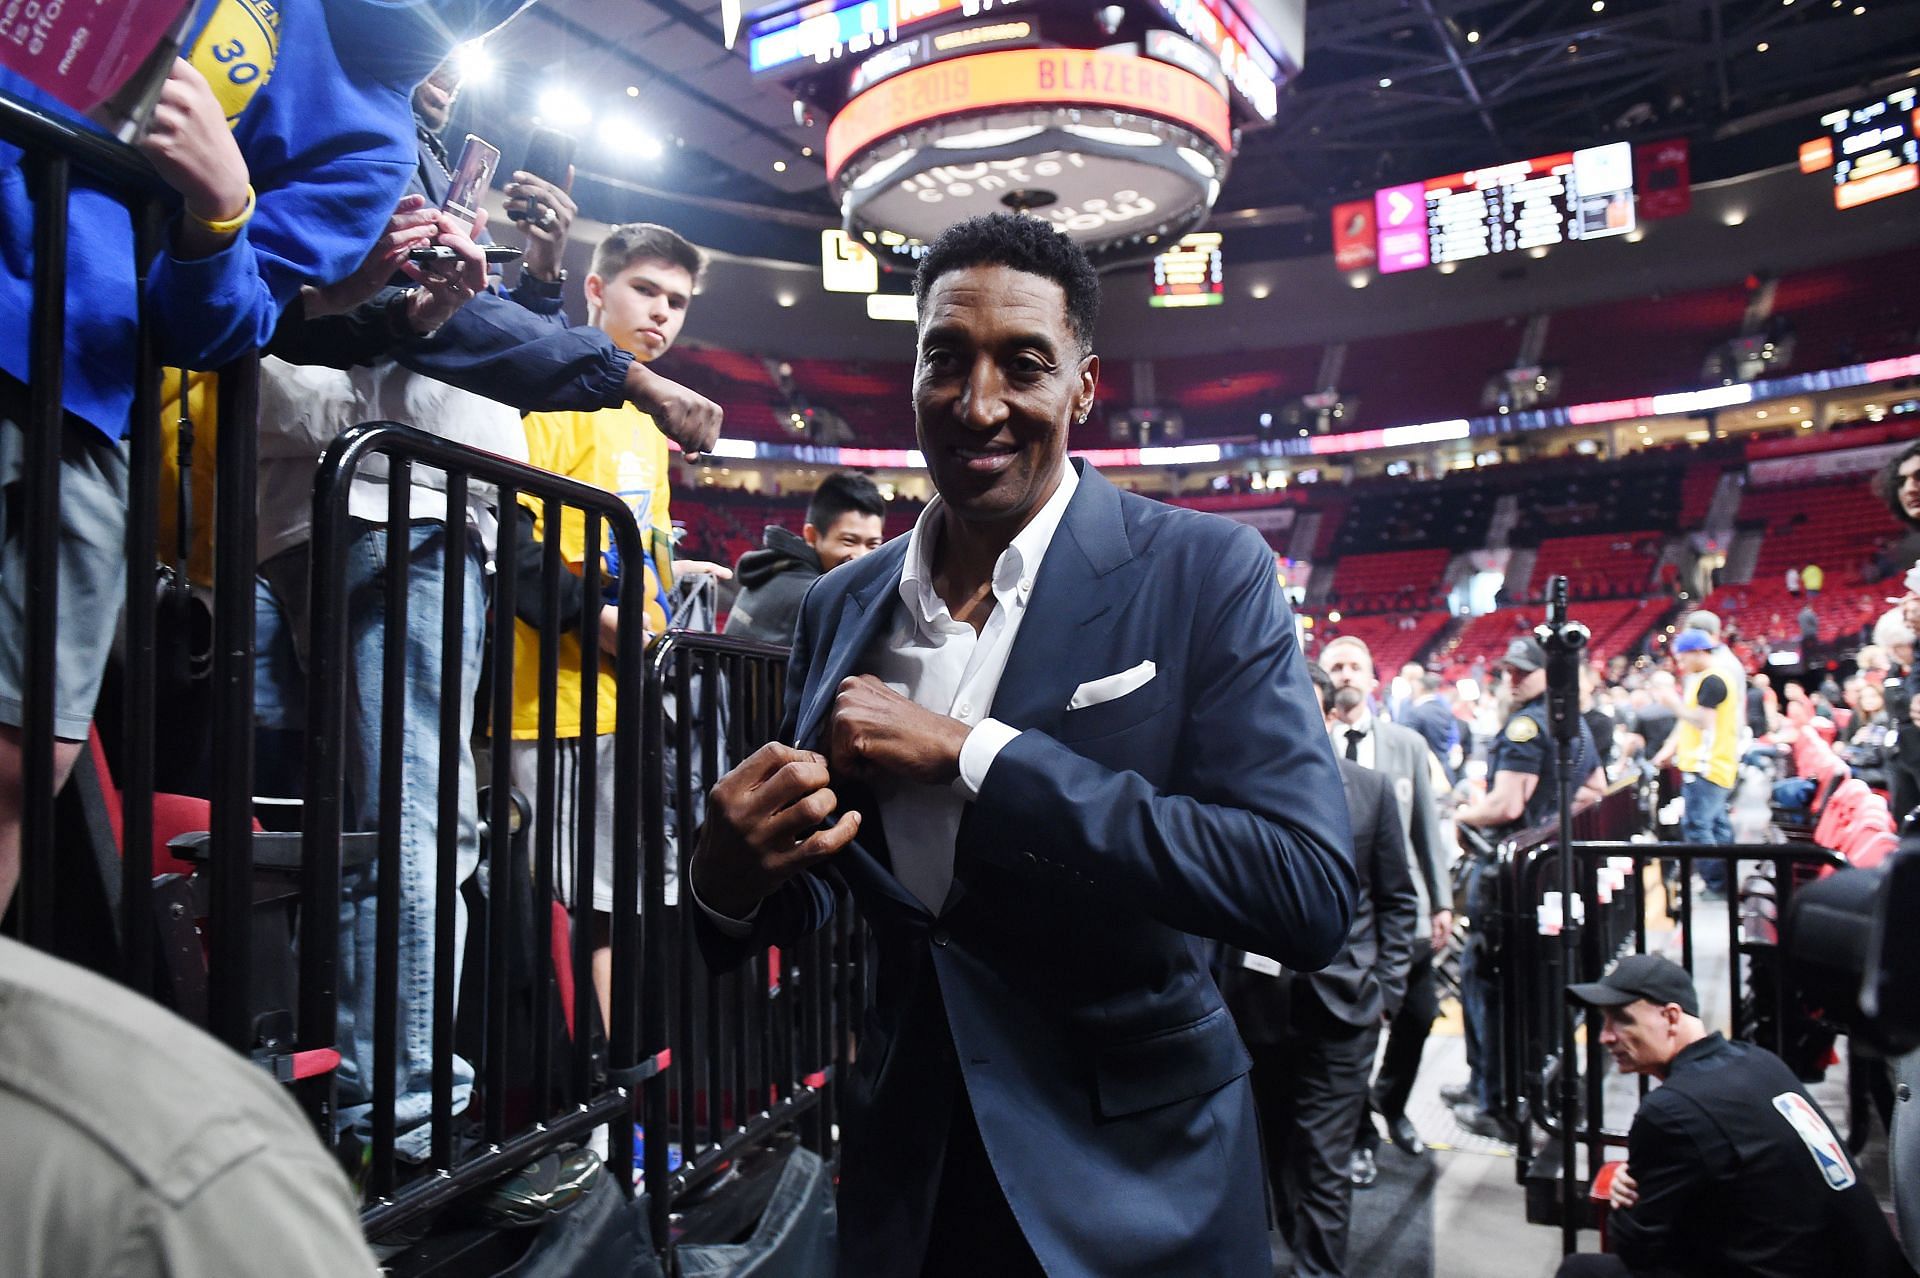 Former NBA player Scottie Pippen looks on prior to game four of the NBA Western Conference Finals between the Golden State Warriors and the Portland Trail Blazers at Moda Center on May 20, 2019 in Portland, Oregon.